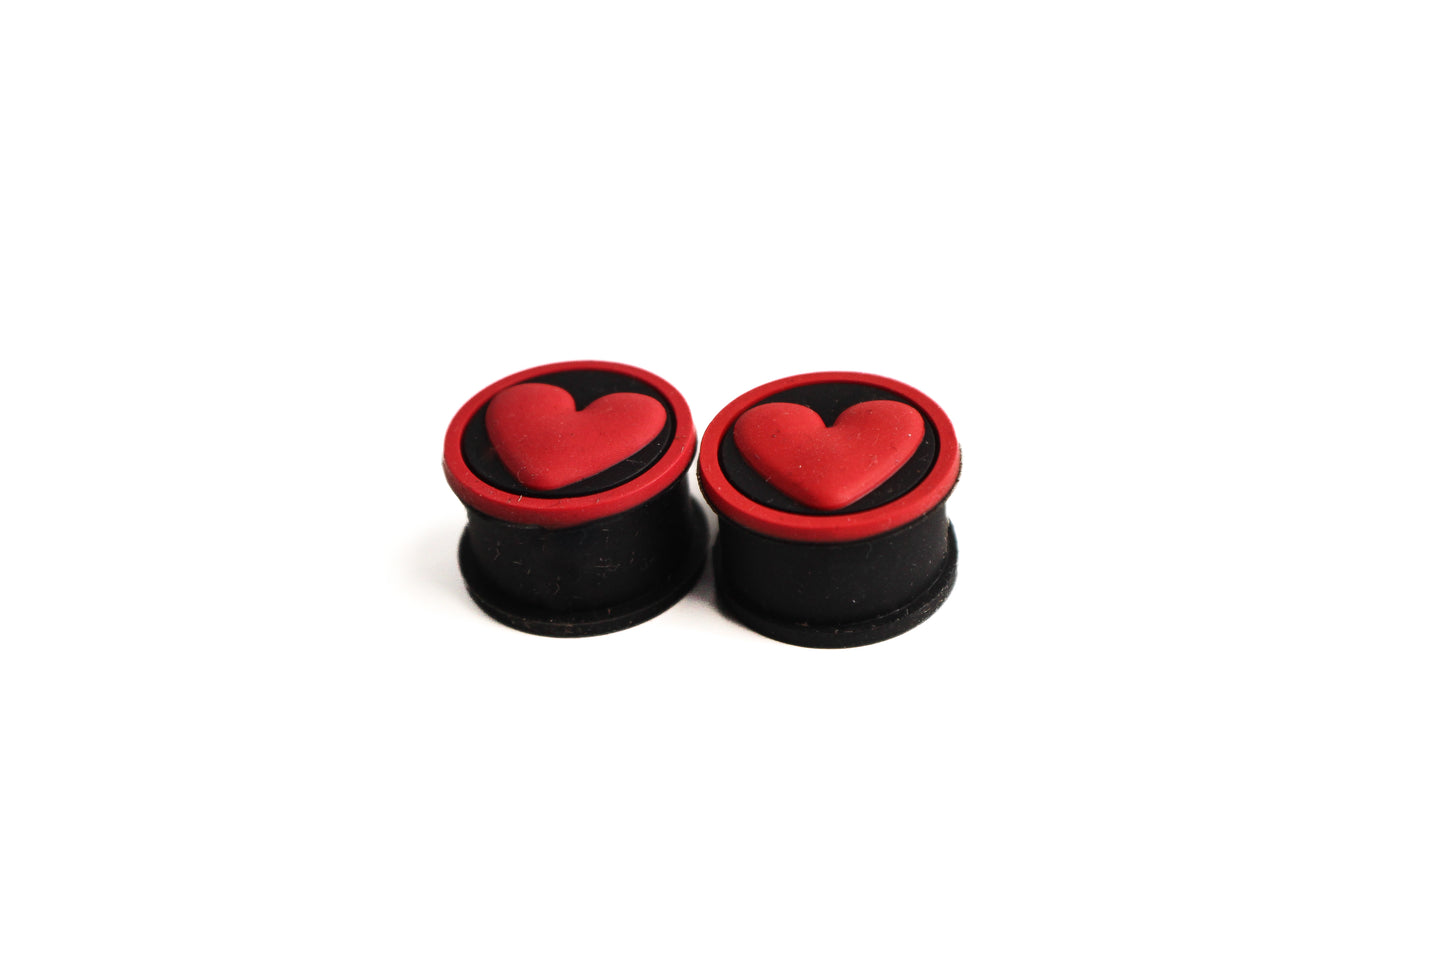 5/8" (16mm) - Heart Silicon Double Flare Plugs